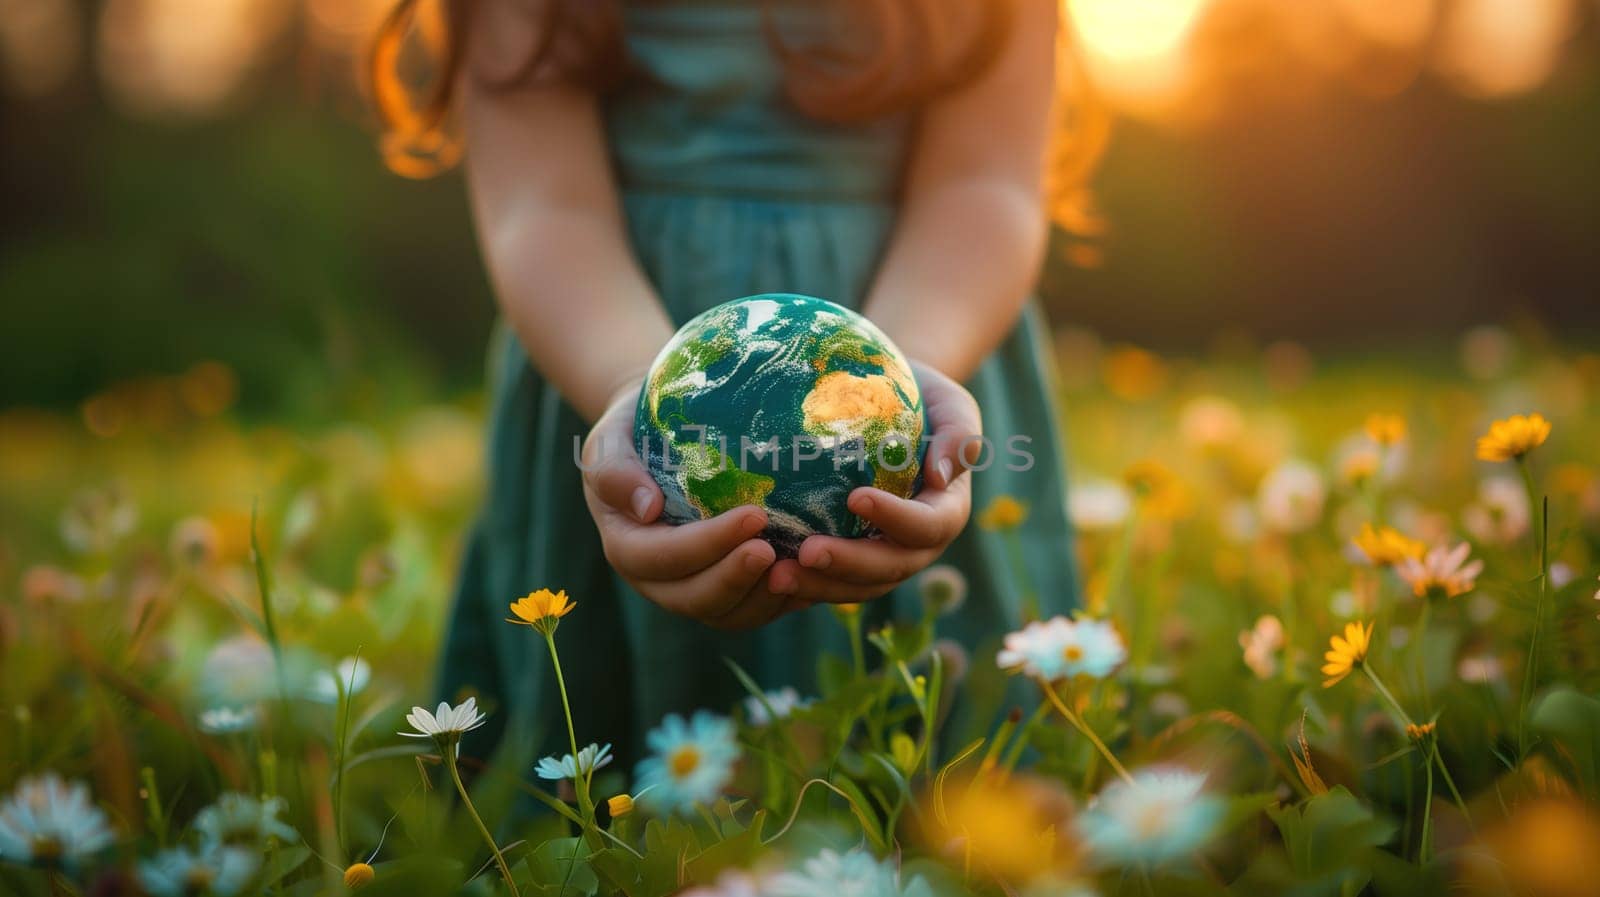 A young individual is kneeling in a meadow full of white flowers at sunset, gently holding a small globe in their hands, symbolizing care and conservation for Earth Day.